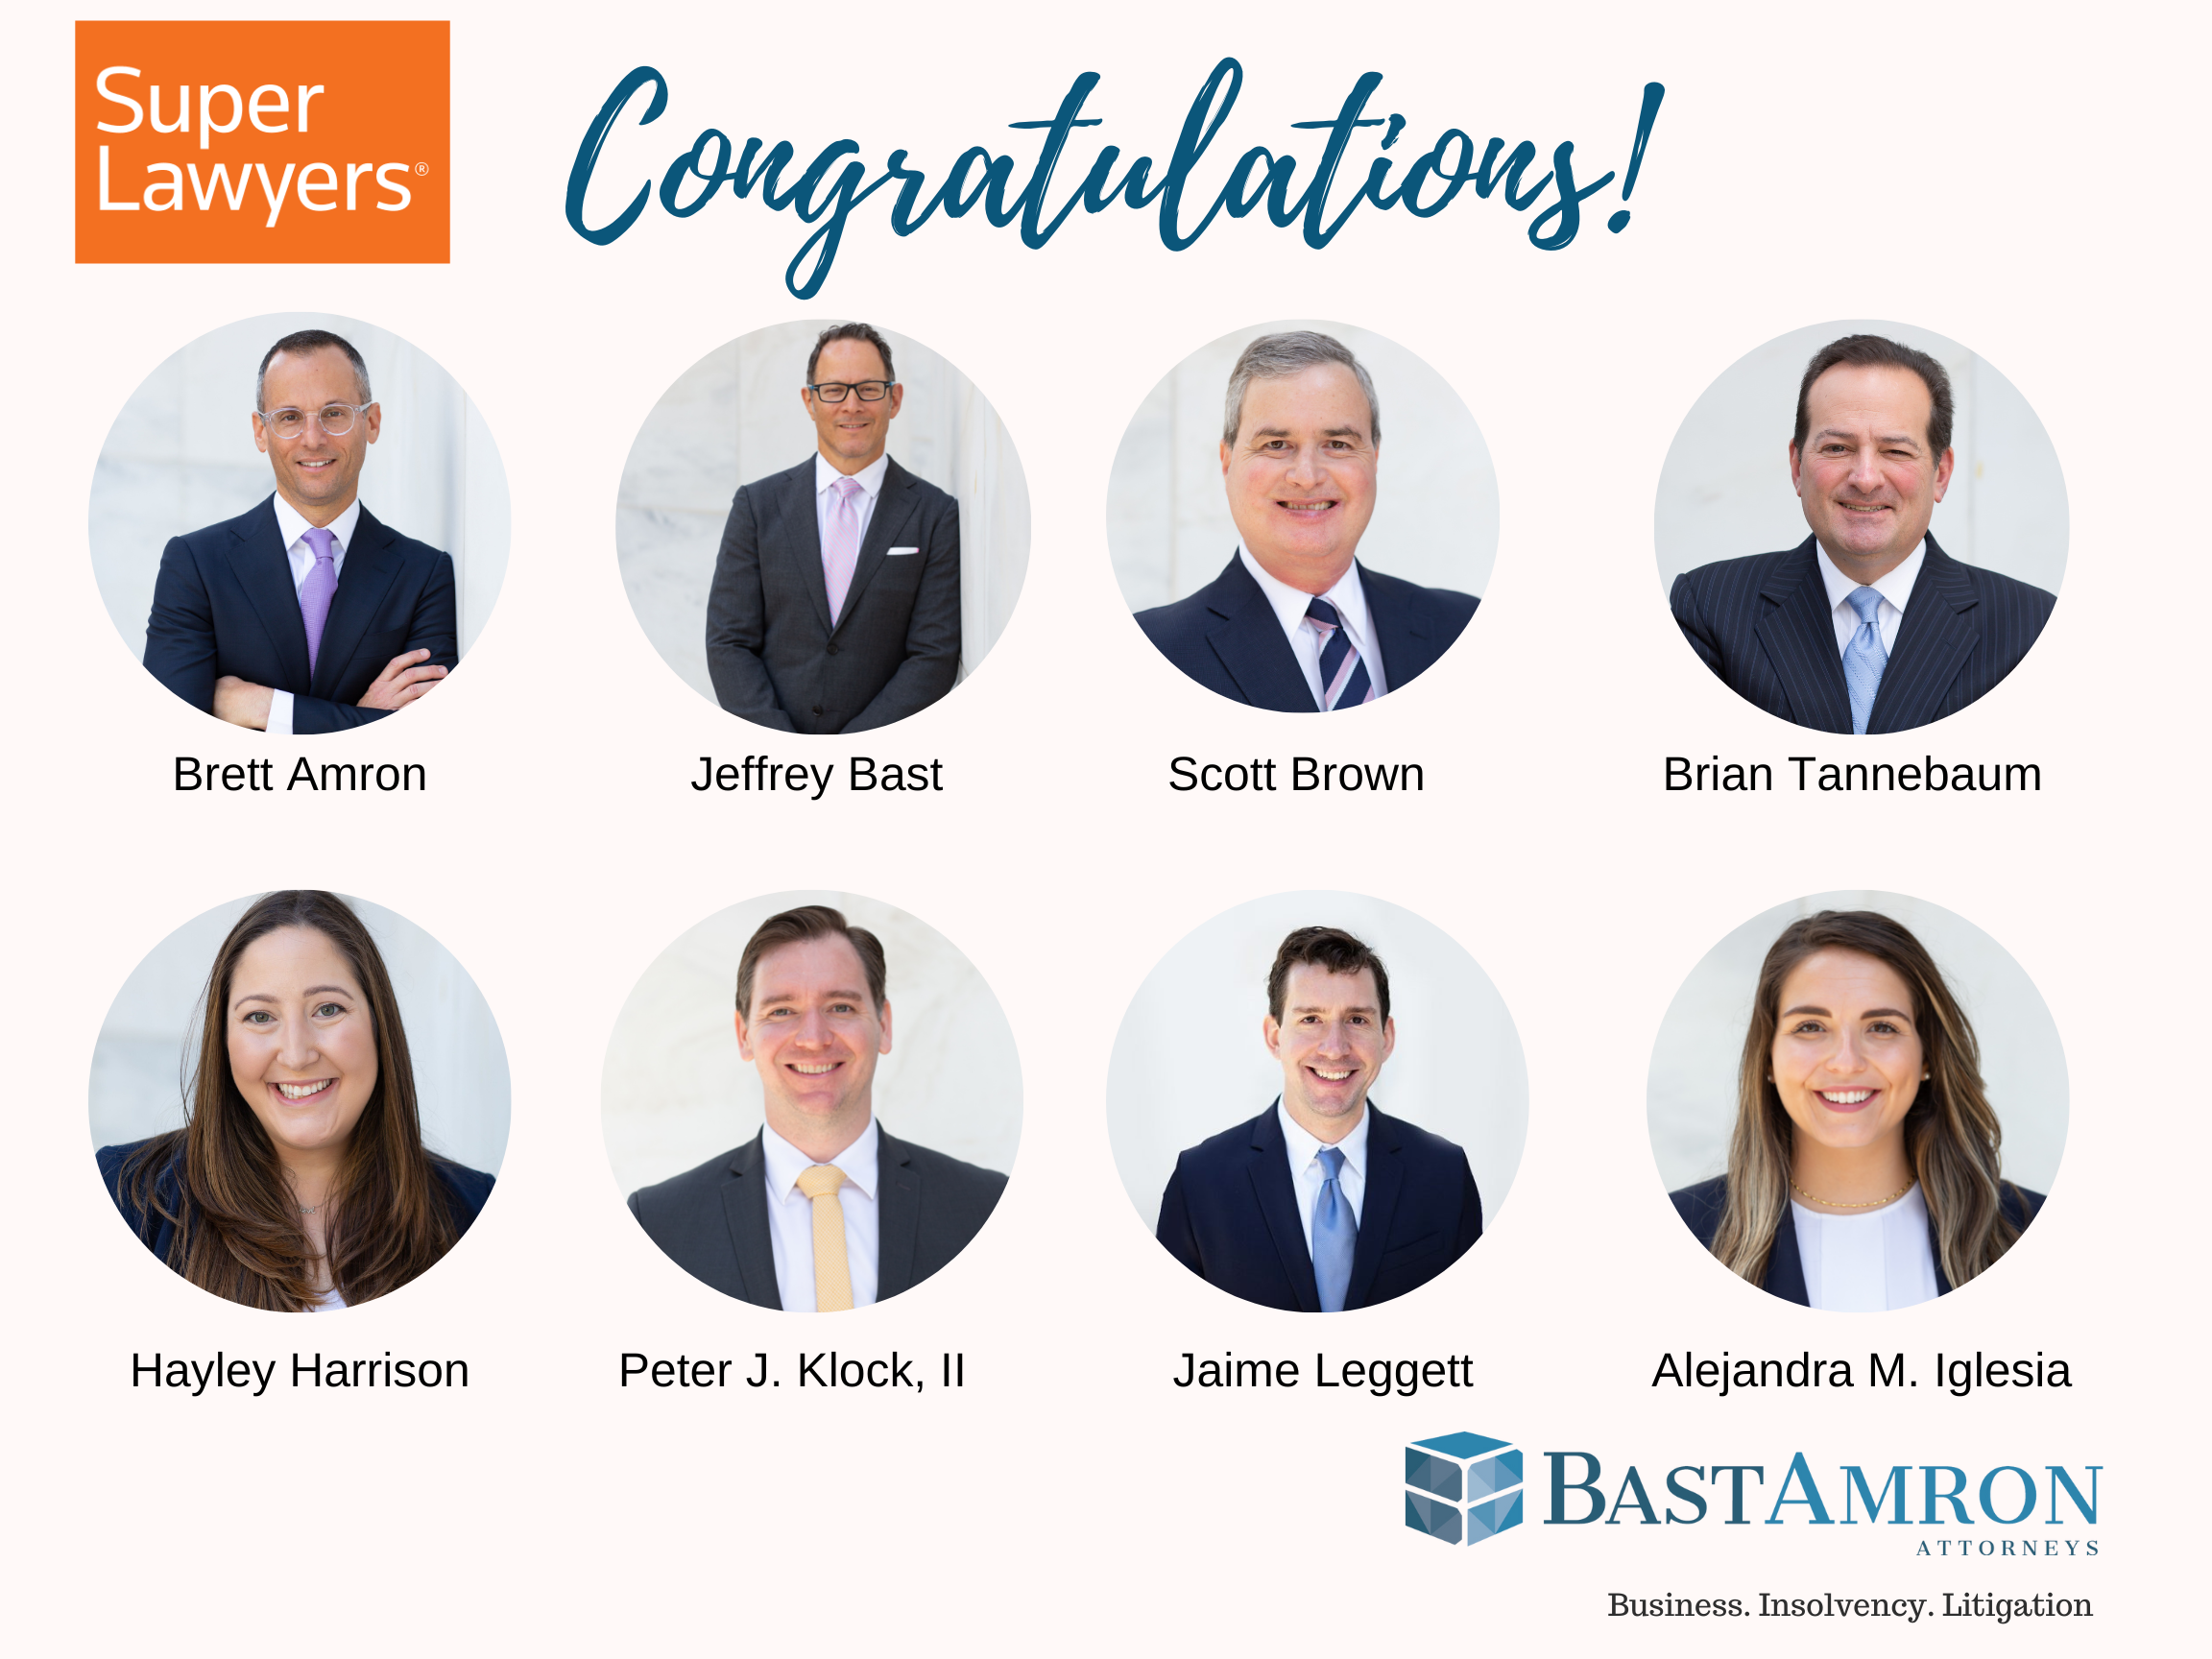 BAST AMRON ATTORNEYS RECOGNIZED IN 2022 EDITION OF FLORIDA SUPER LAWYERS